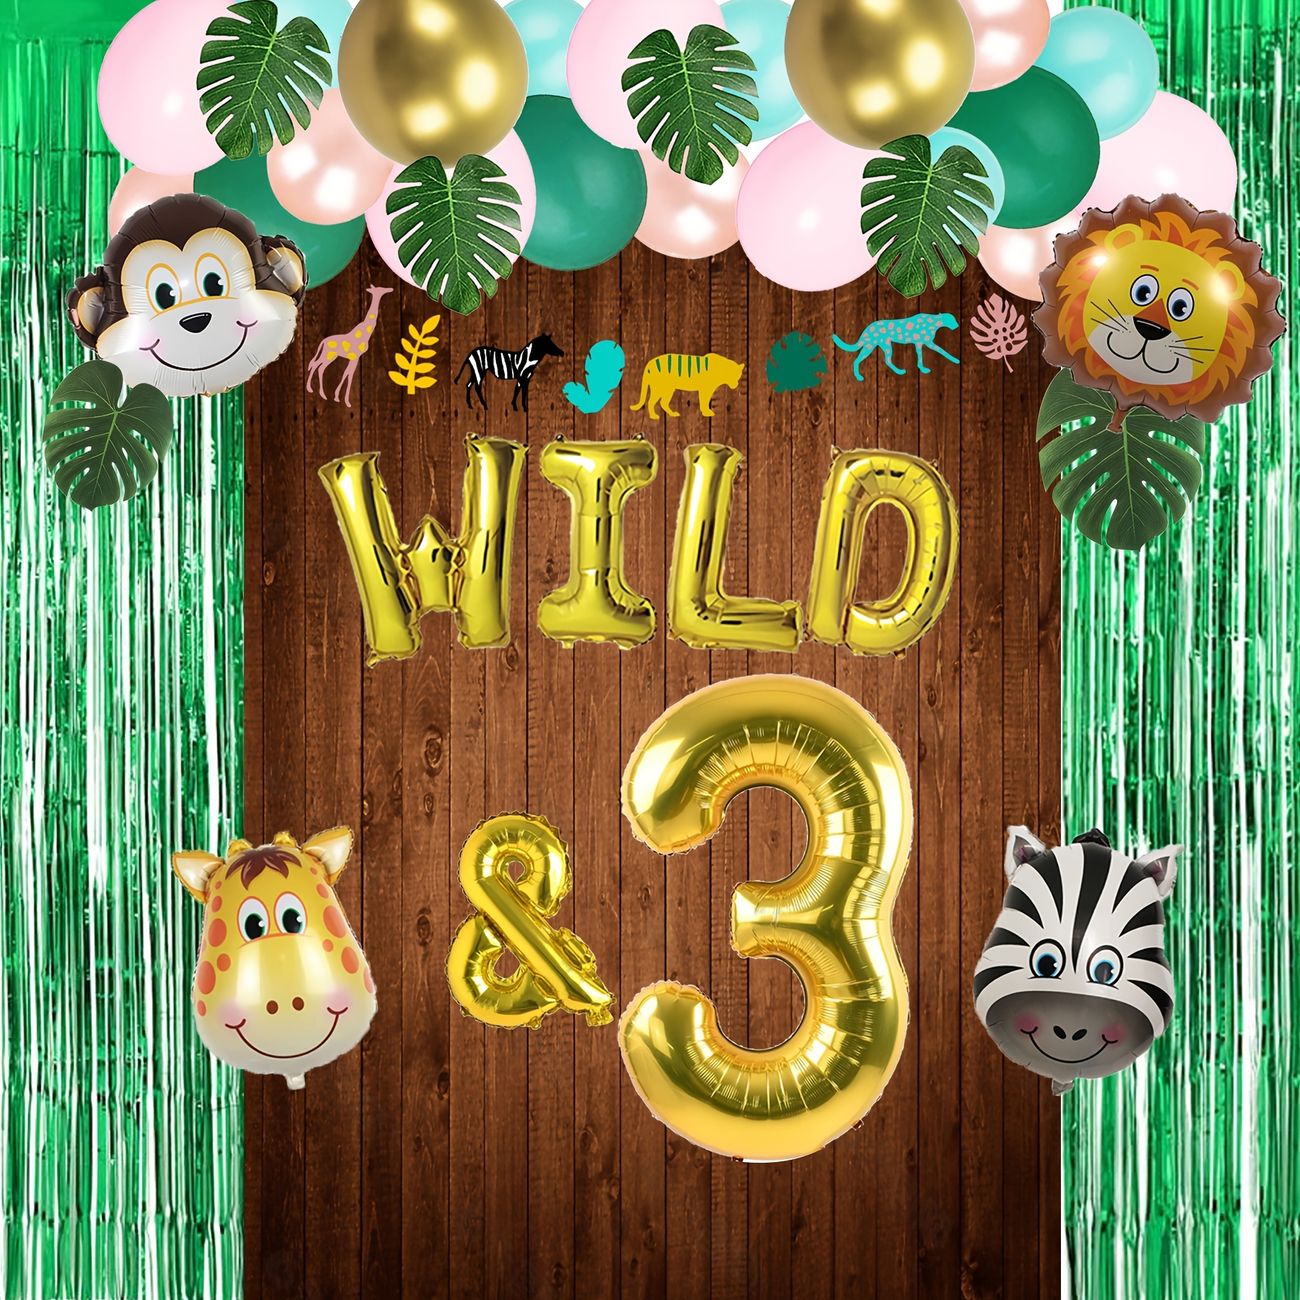 50pcs Wild And Three Safari Animal 3rd Birthday Decorations Zoo Theme Animal  Garland Balloon Arch Tropical Palm Leaves Green Foil Curtain Jungle Wild  Animals Backdrop Decorations For Boy Girl Birthday Party -